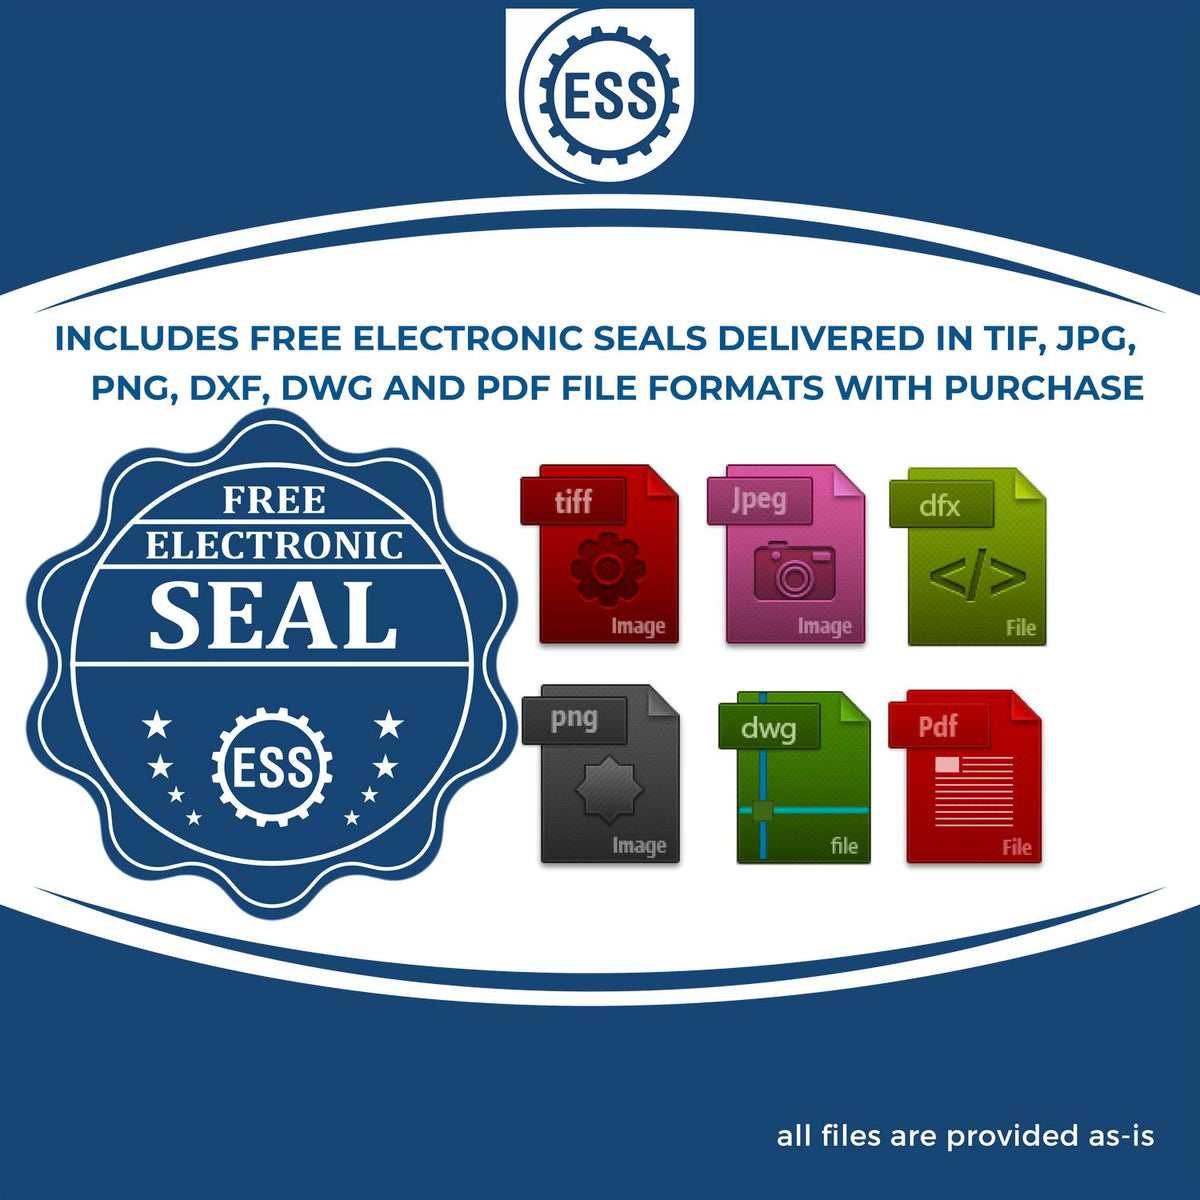 An infographic for the free electronic seal for the Heavy Duty Cast Iron Michigan Architect Embosser illustrating the different file type icons such as DXF, DWG, TIF, JPG and PNG.